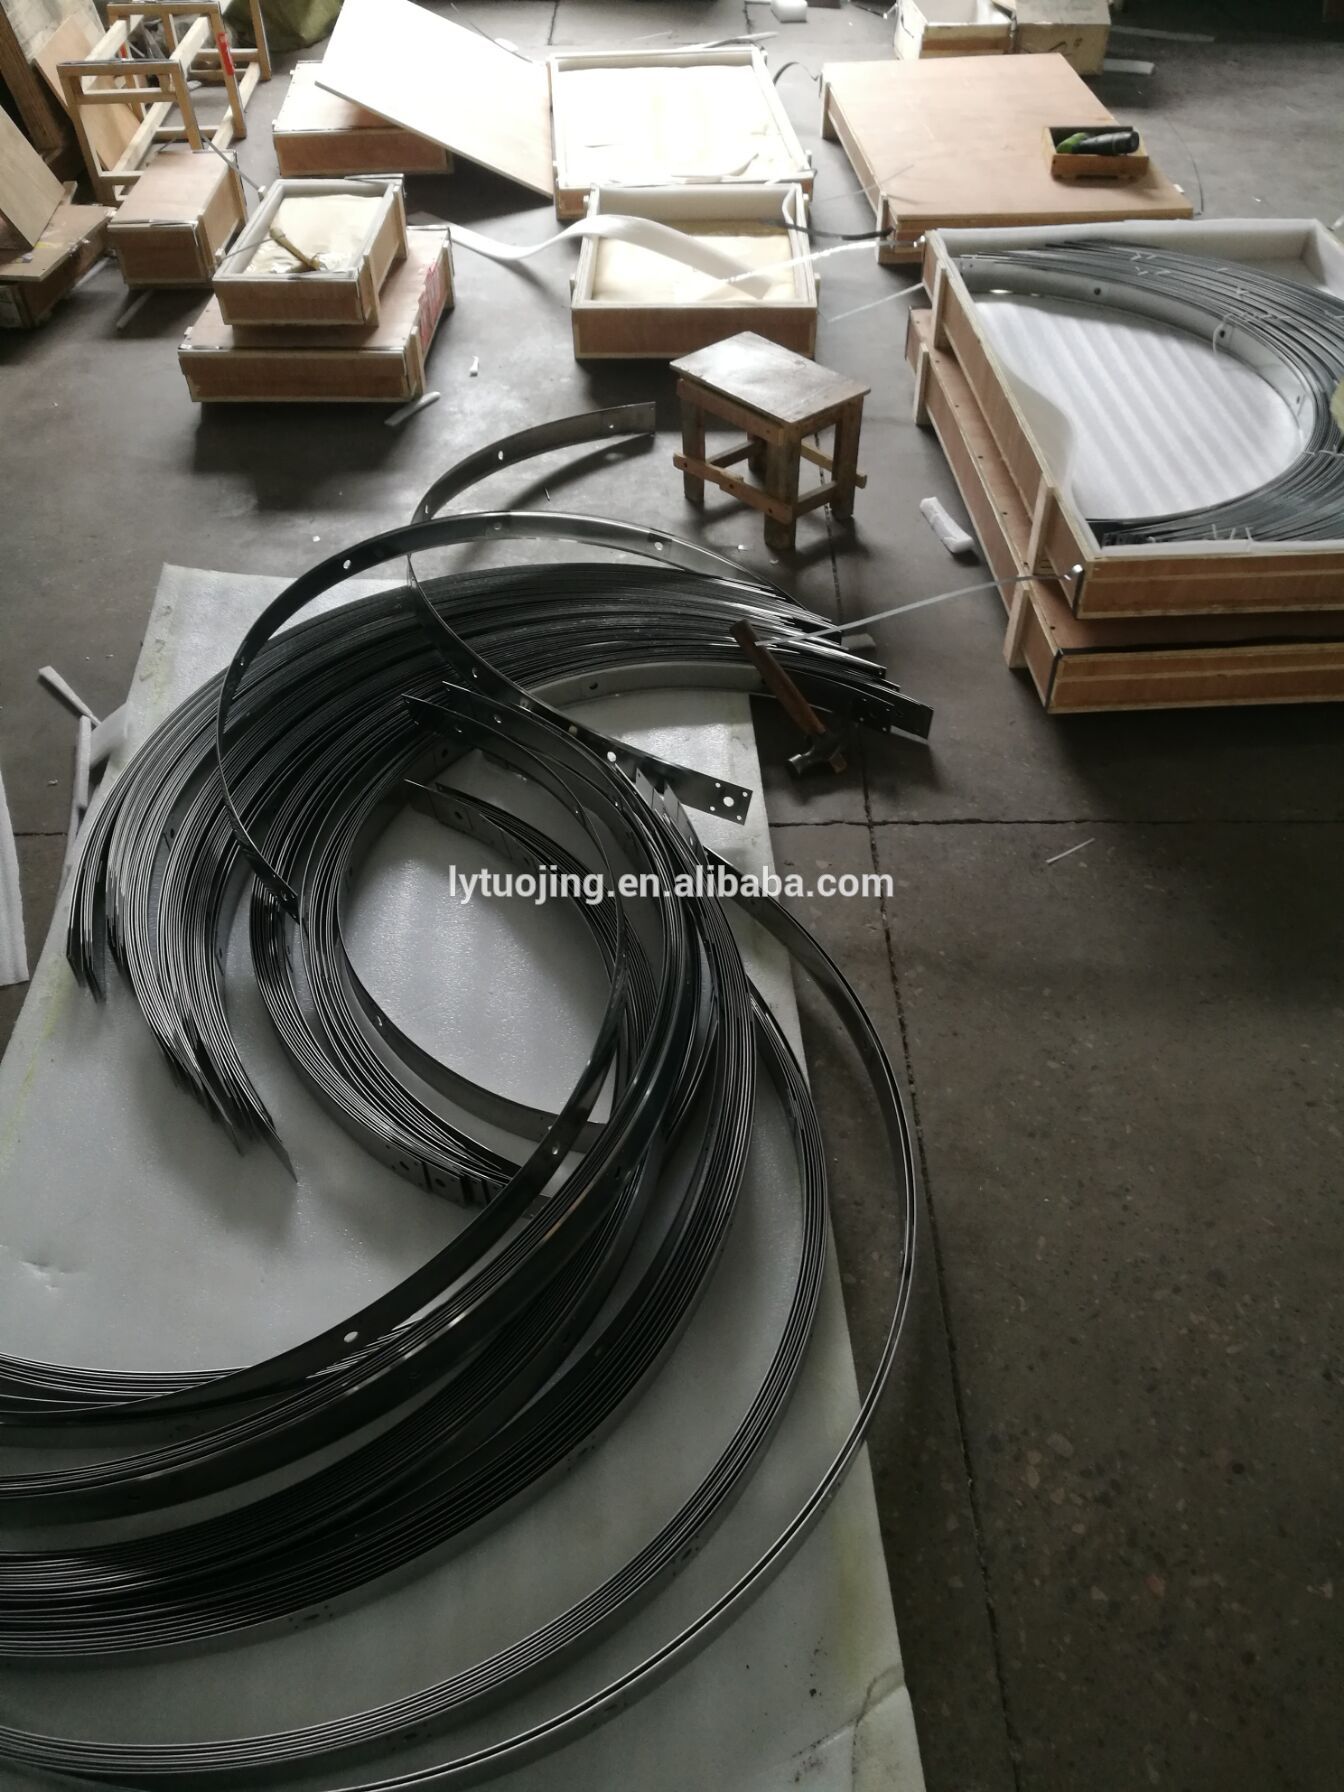 molybdenum hearth peer for high temperature furnace components